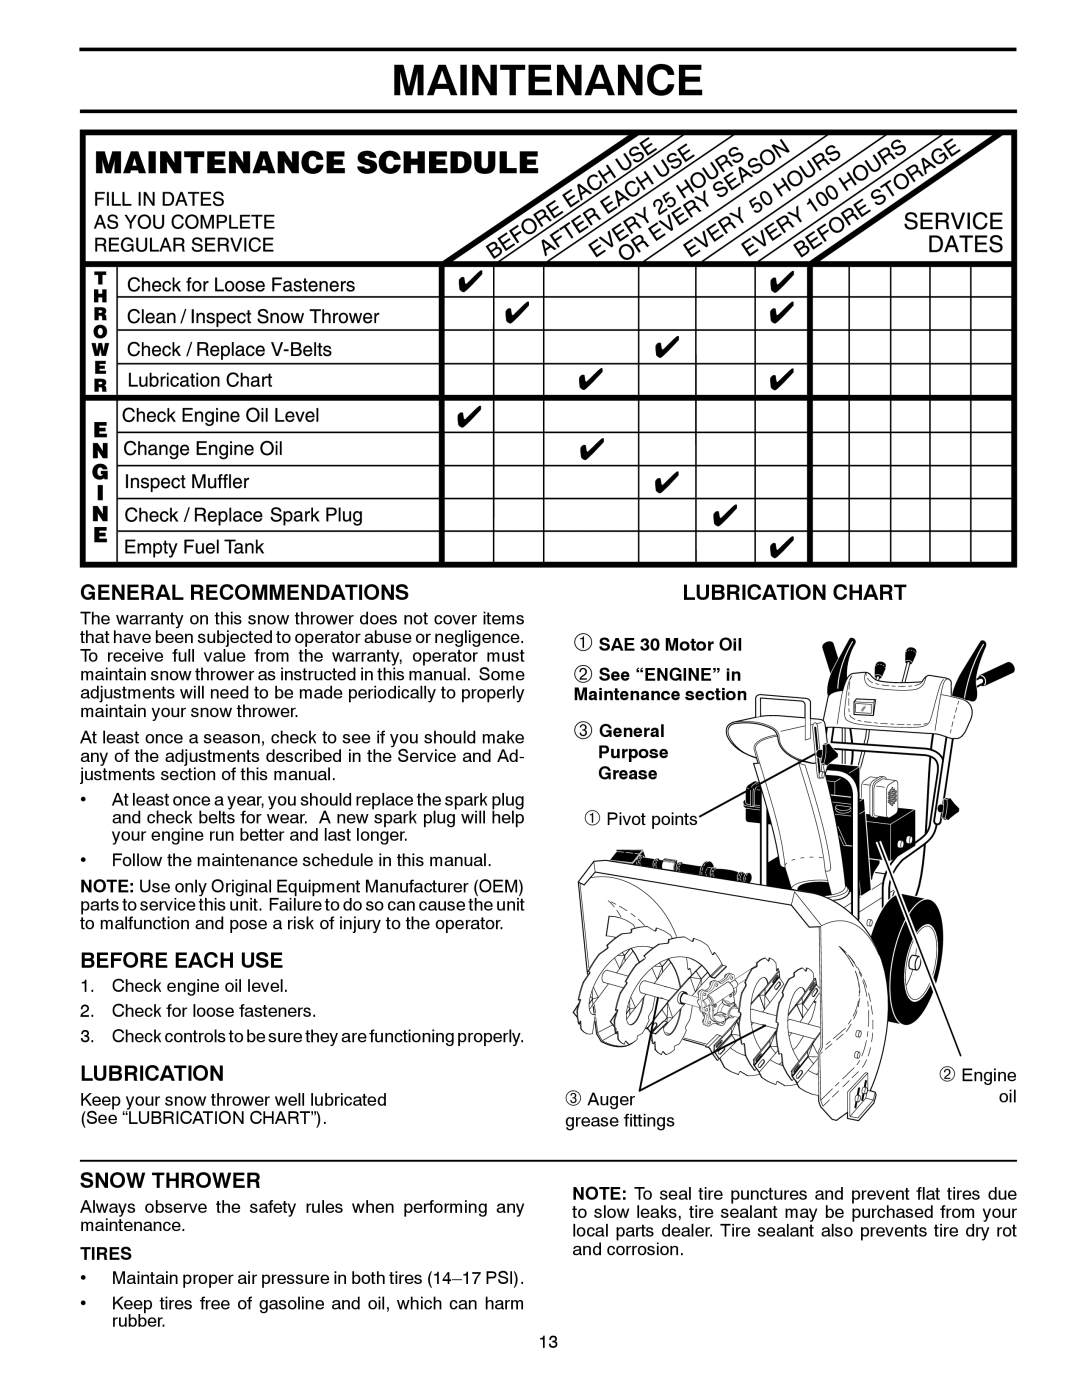 Husqvarna 1827SB manual Maintenance, General Recommendations, Before Each Use, Snow Thrower, Lubrication Chart, Tires 